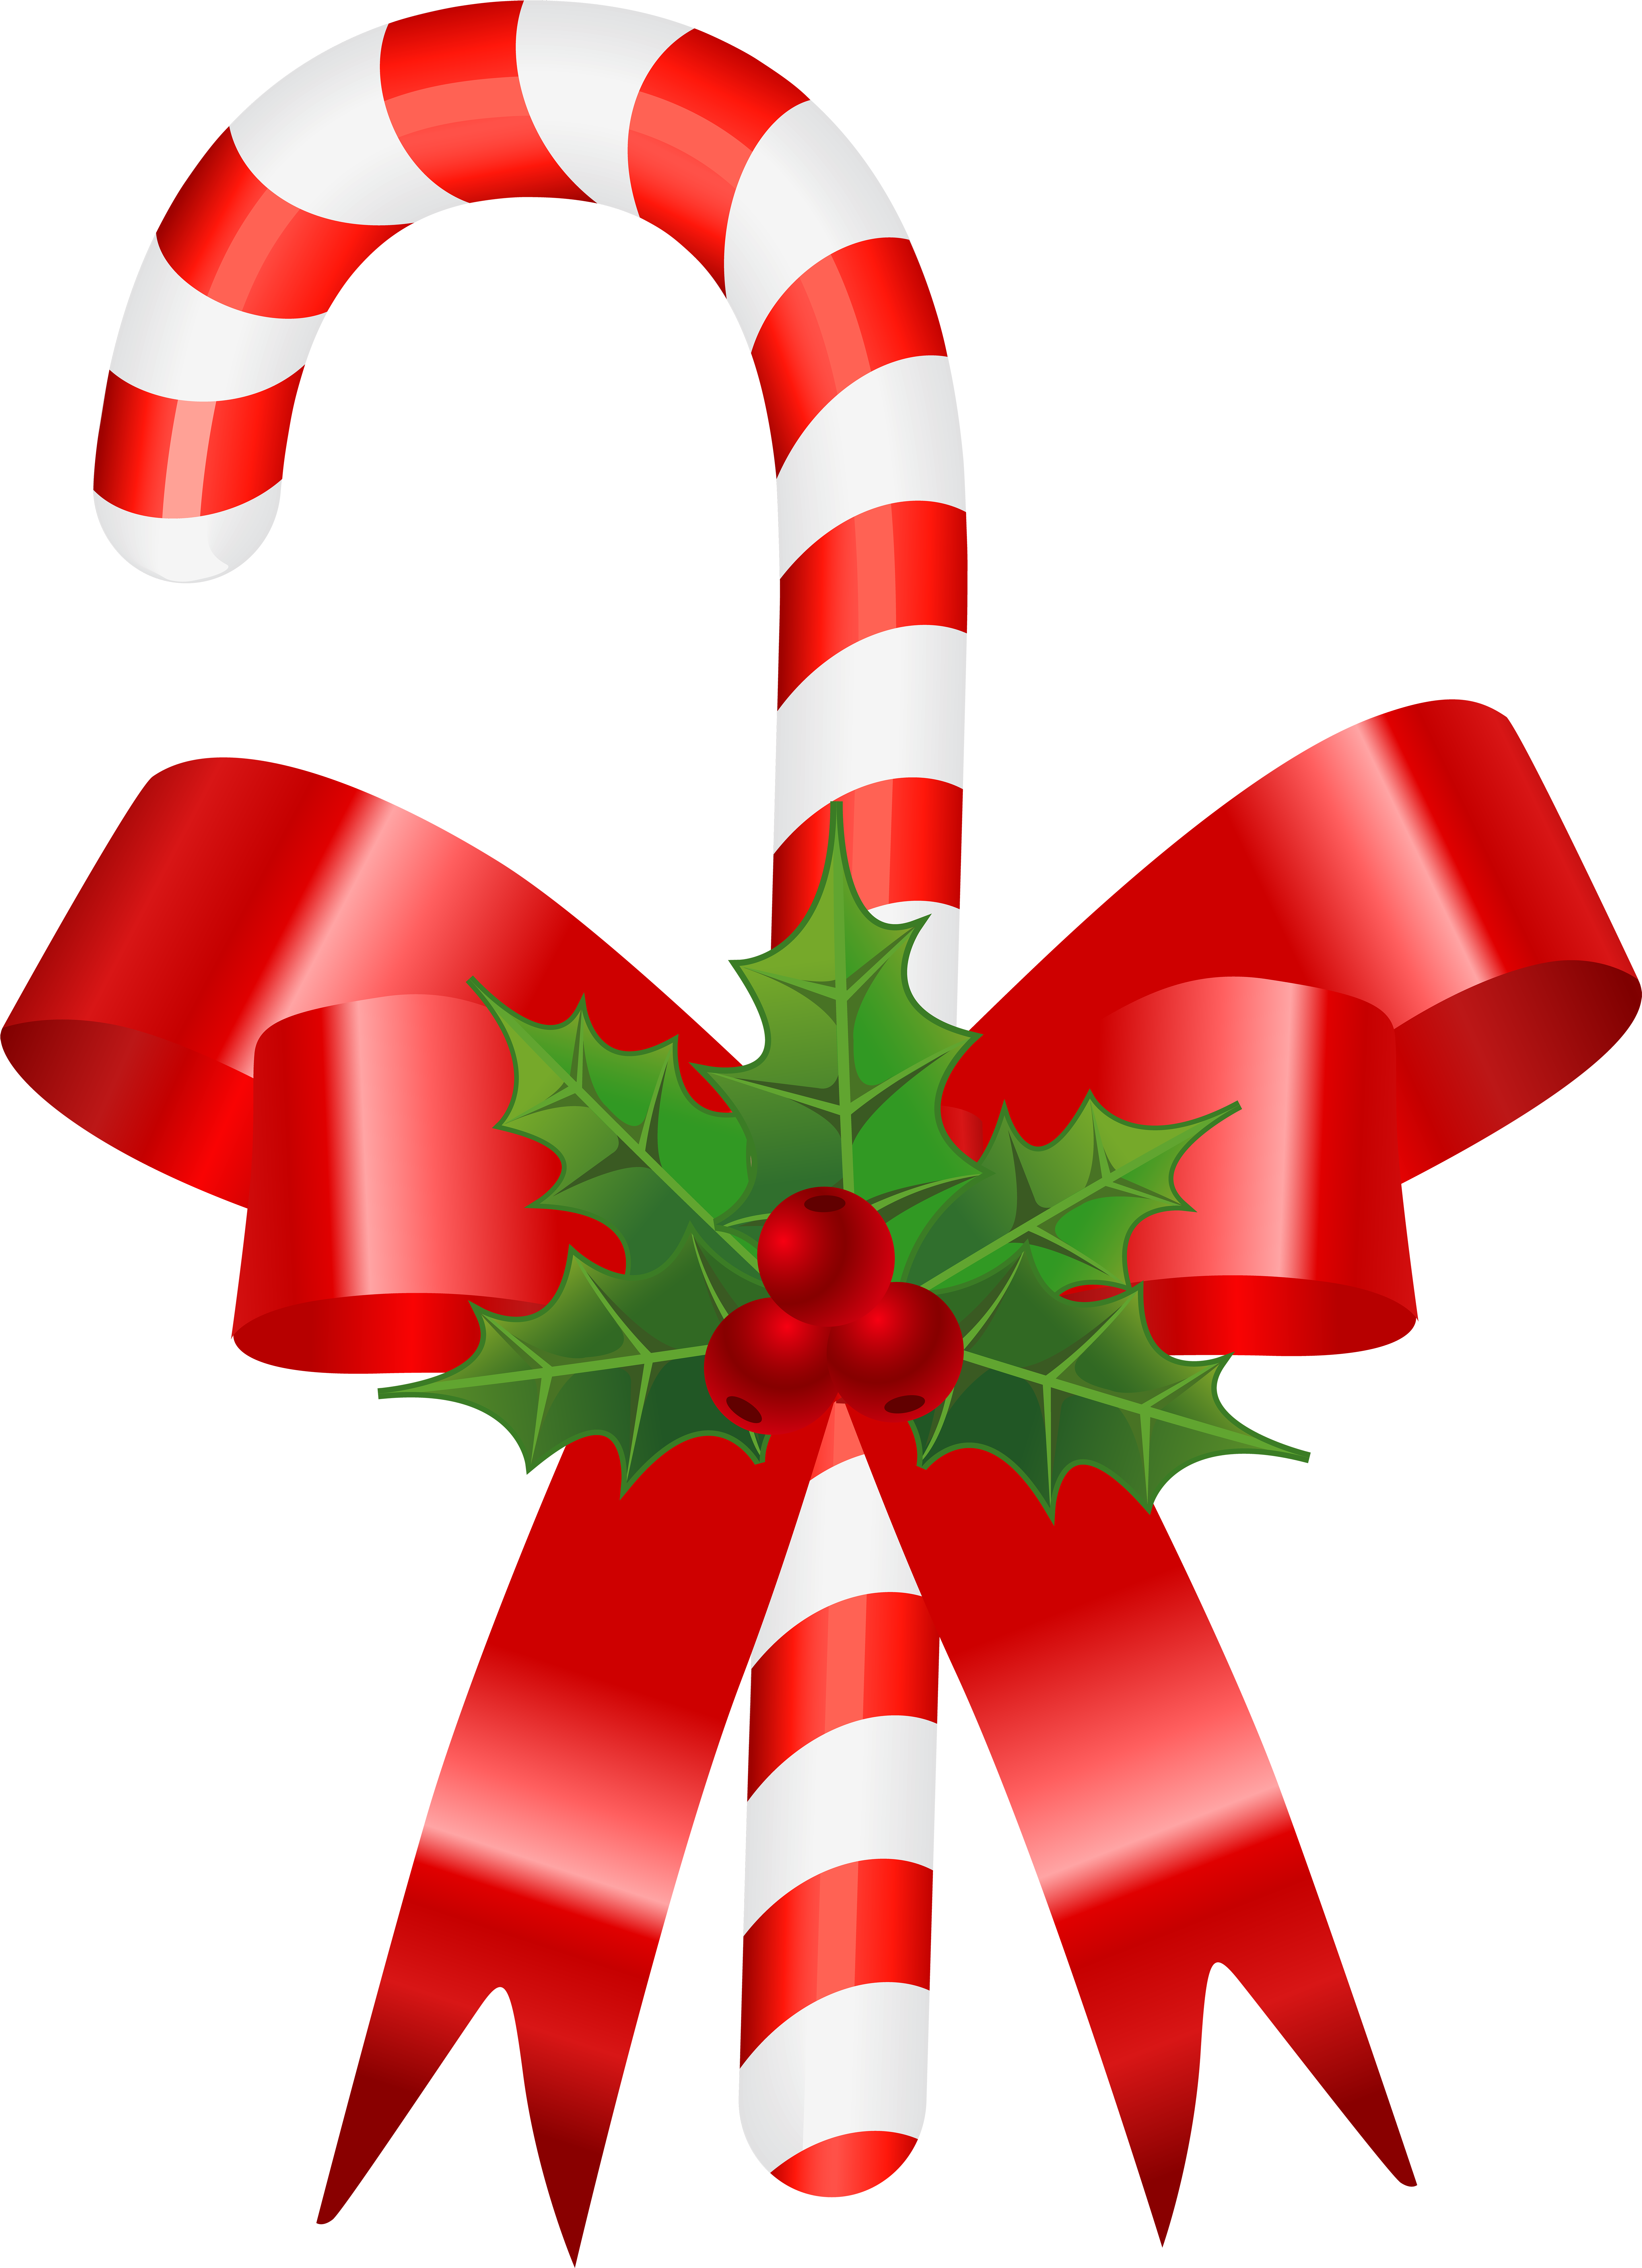 Christmas Ornament Candy Cane Gift Ribbon - Christmas Ornament Candy Cane Gift Ribbon (5792x8000)